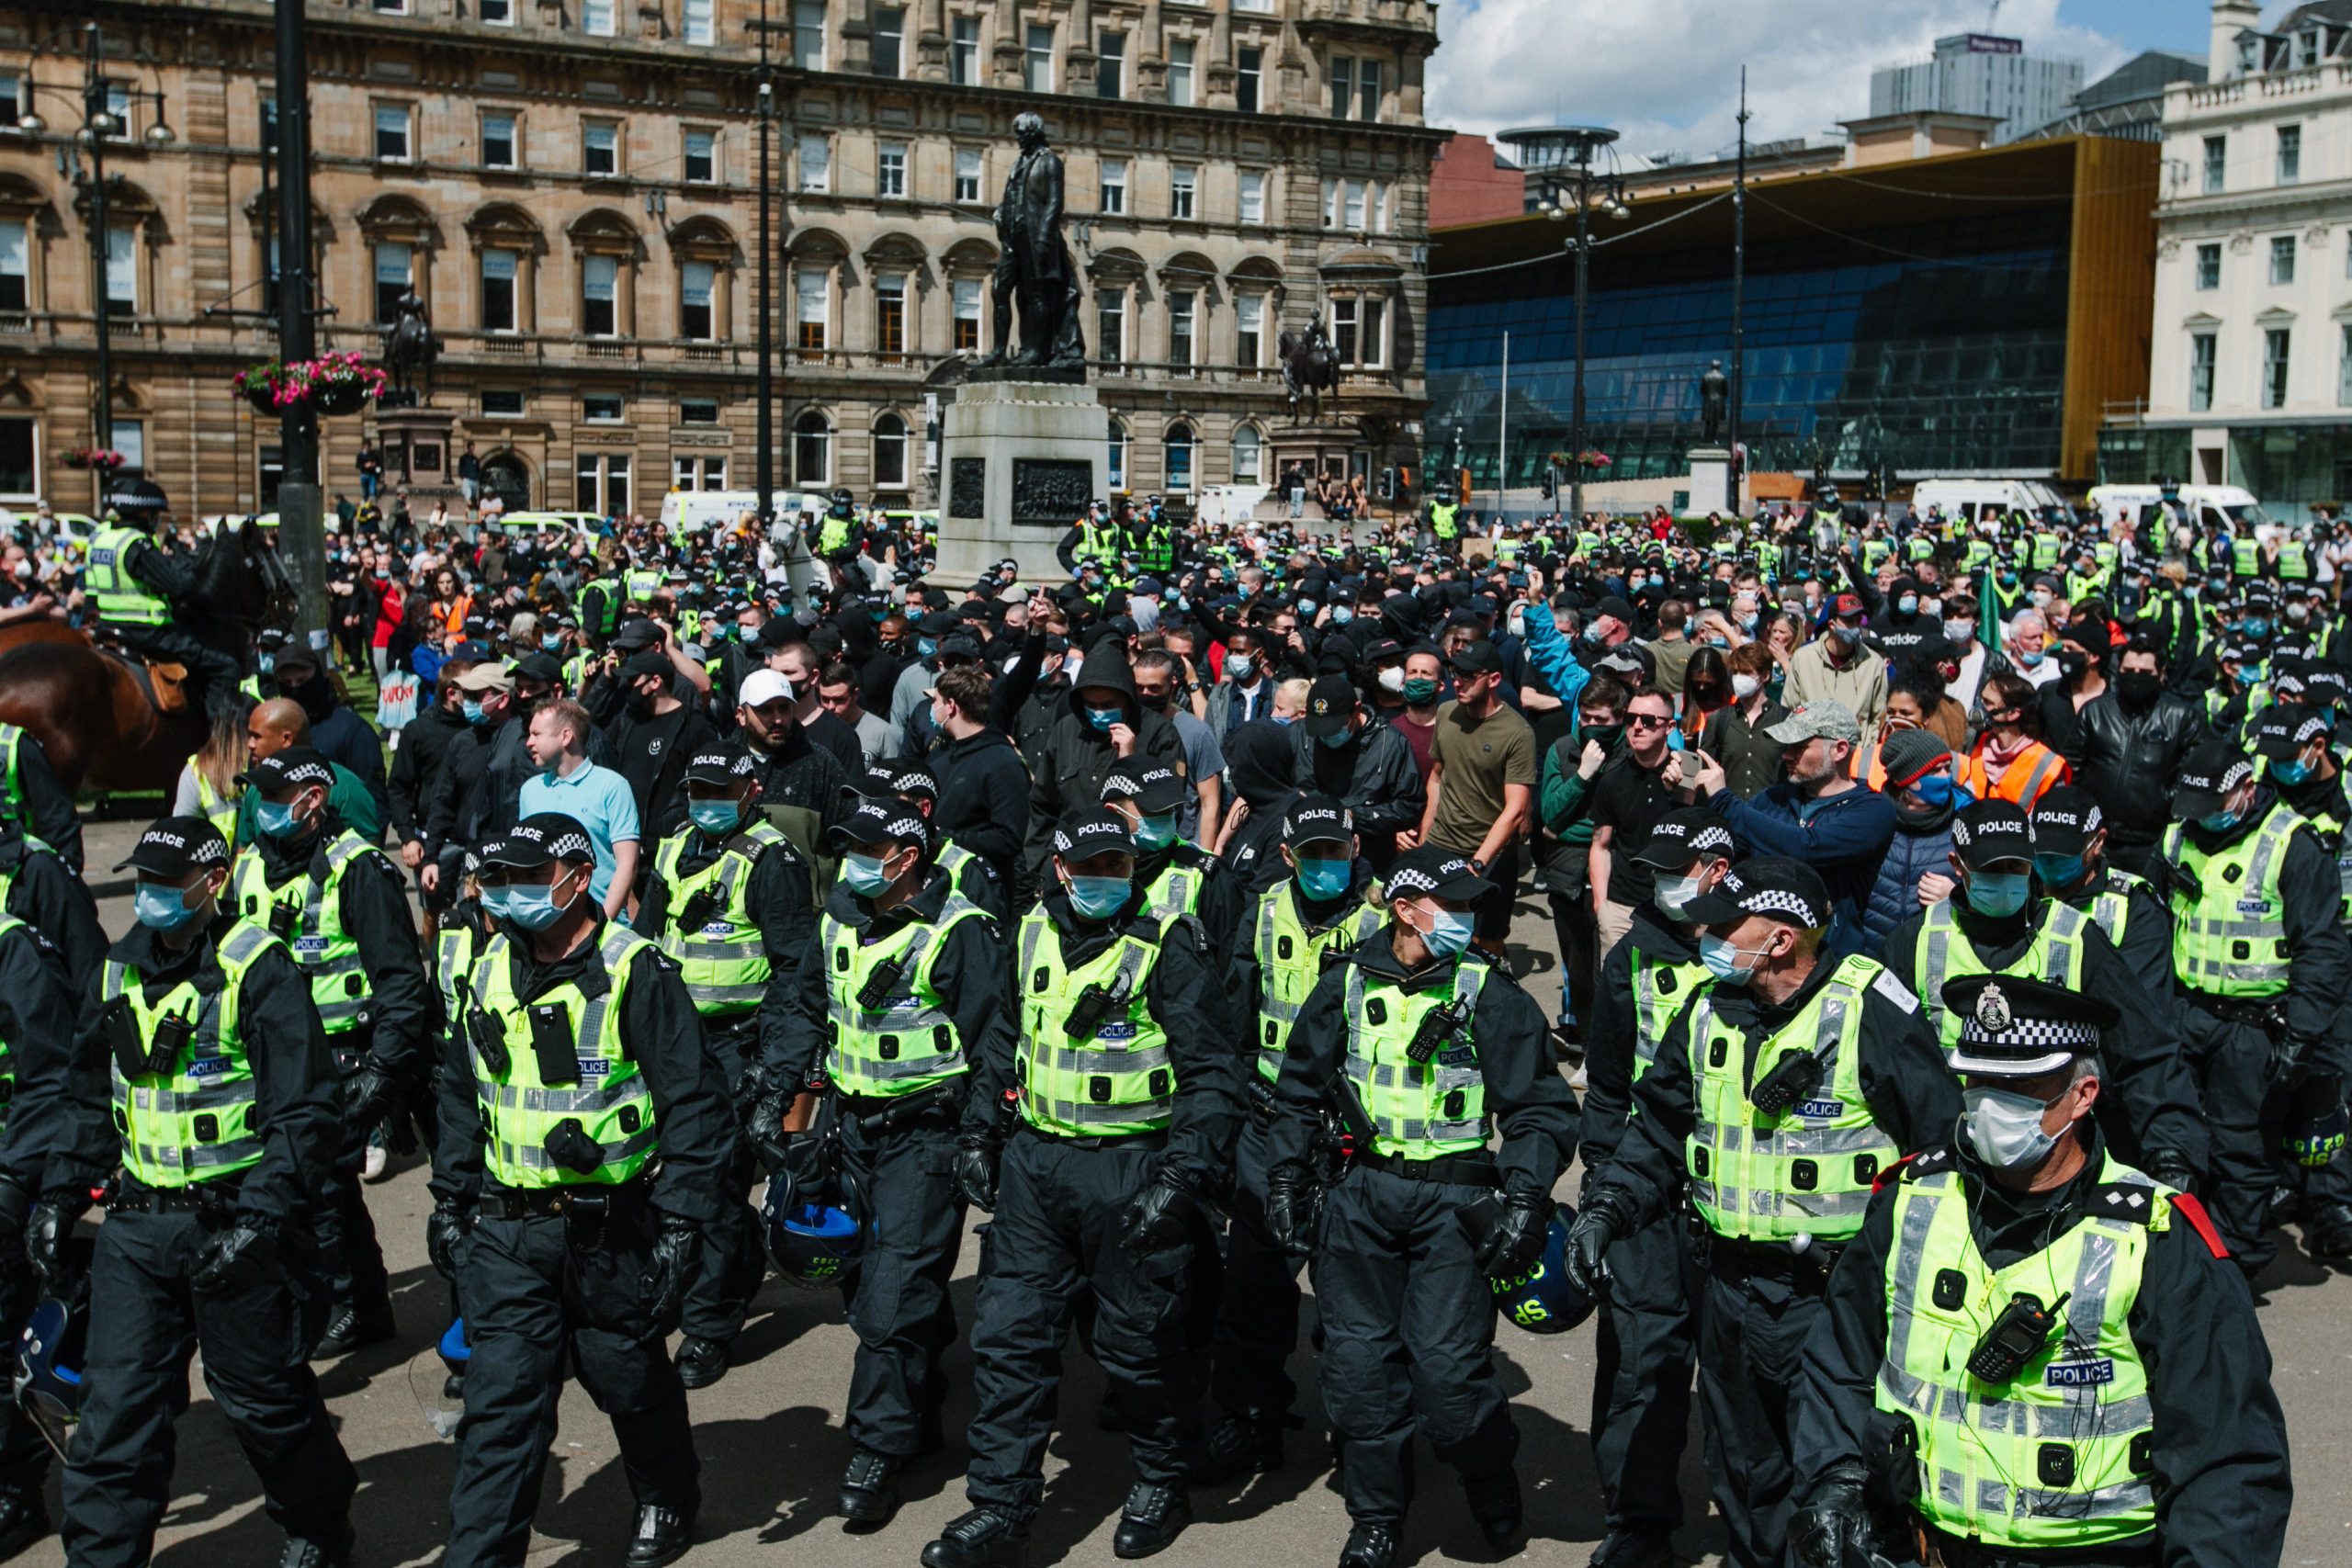 Police and crowds in Glasgow’s George Square